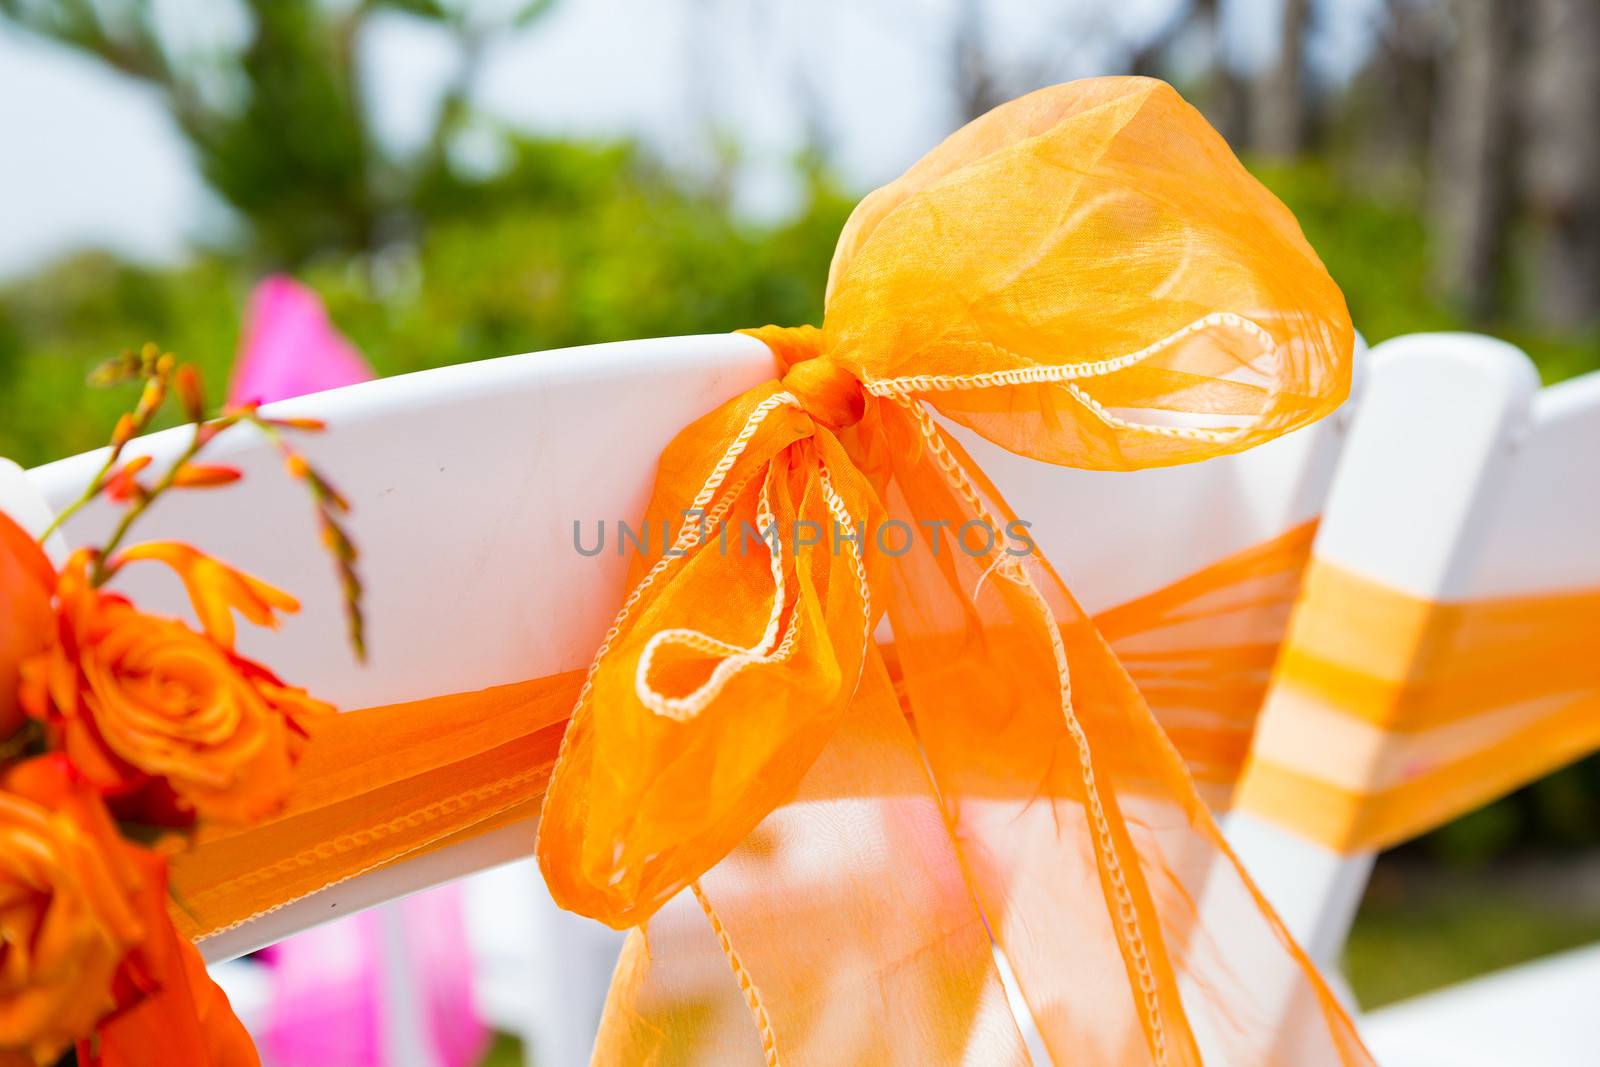 Bows and fabric are tied together to create decorations for this outdoor coastal summer wedding with vibrant colors.